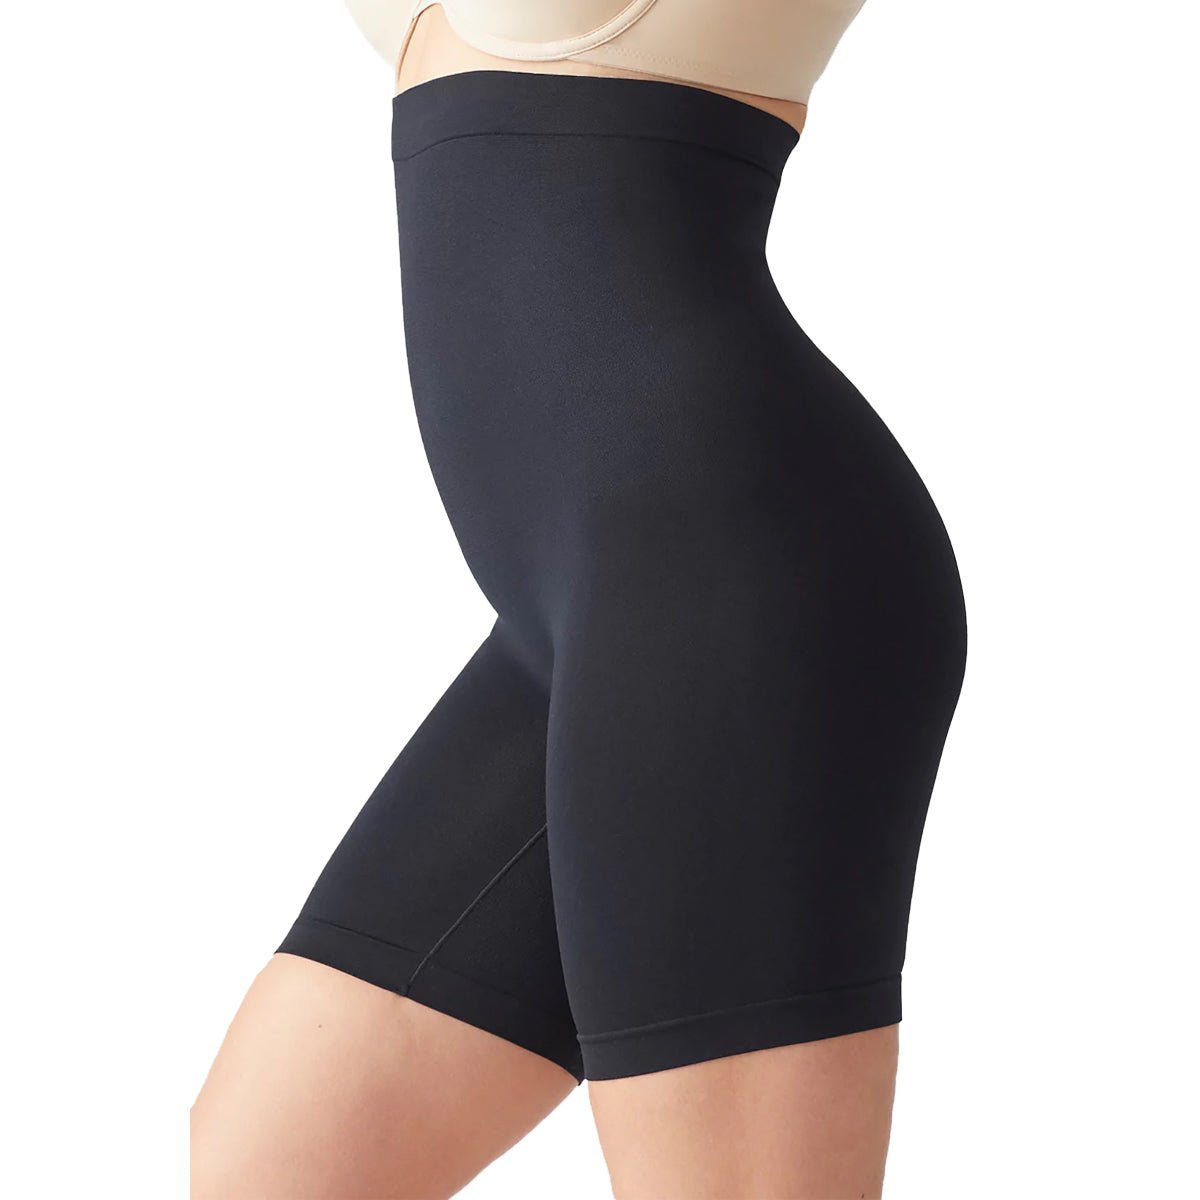 How I stay SNATCHED! Undetectable/Seamless Yahaira Shapewear! J